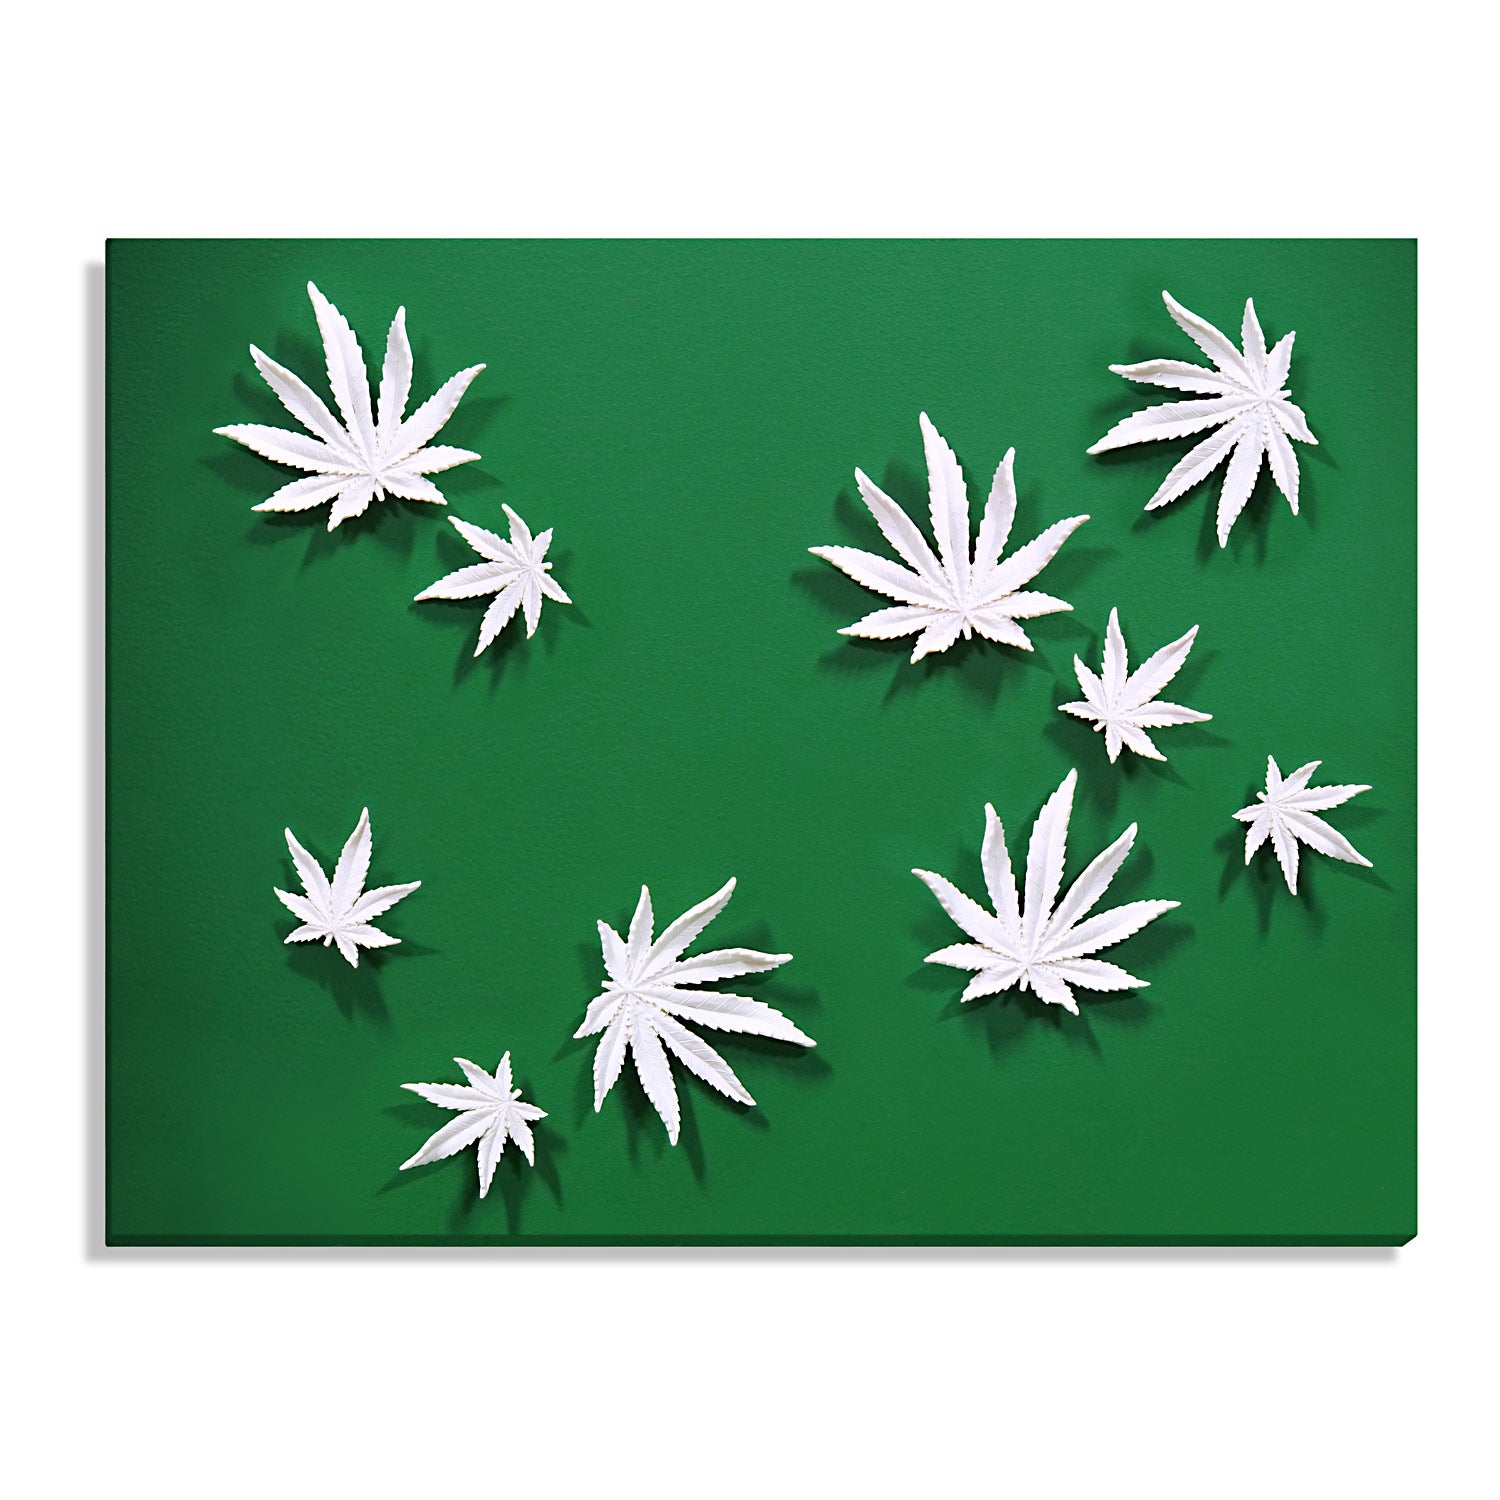 Wall Play™ Substrate Green Dark w/ Cannabis Leaves Off-White